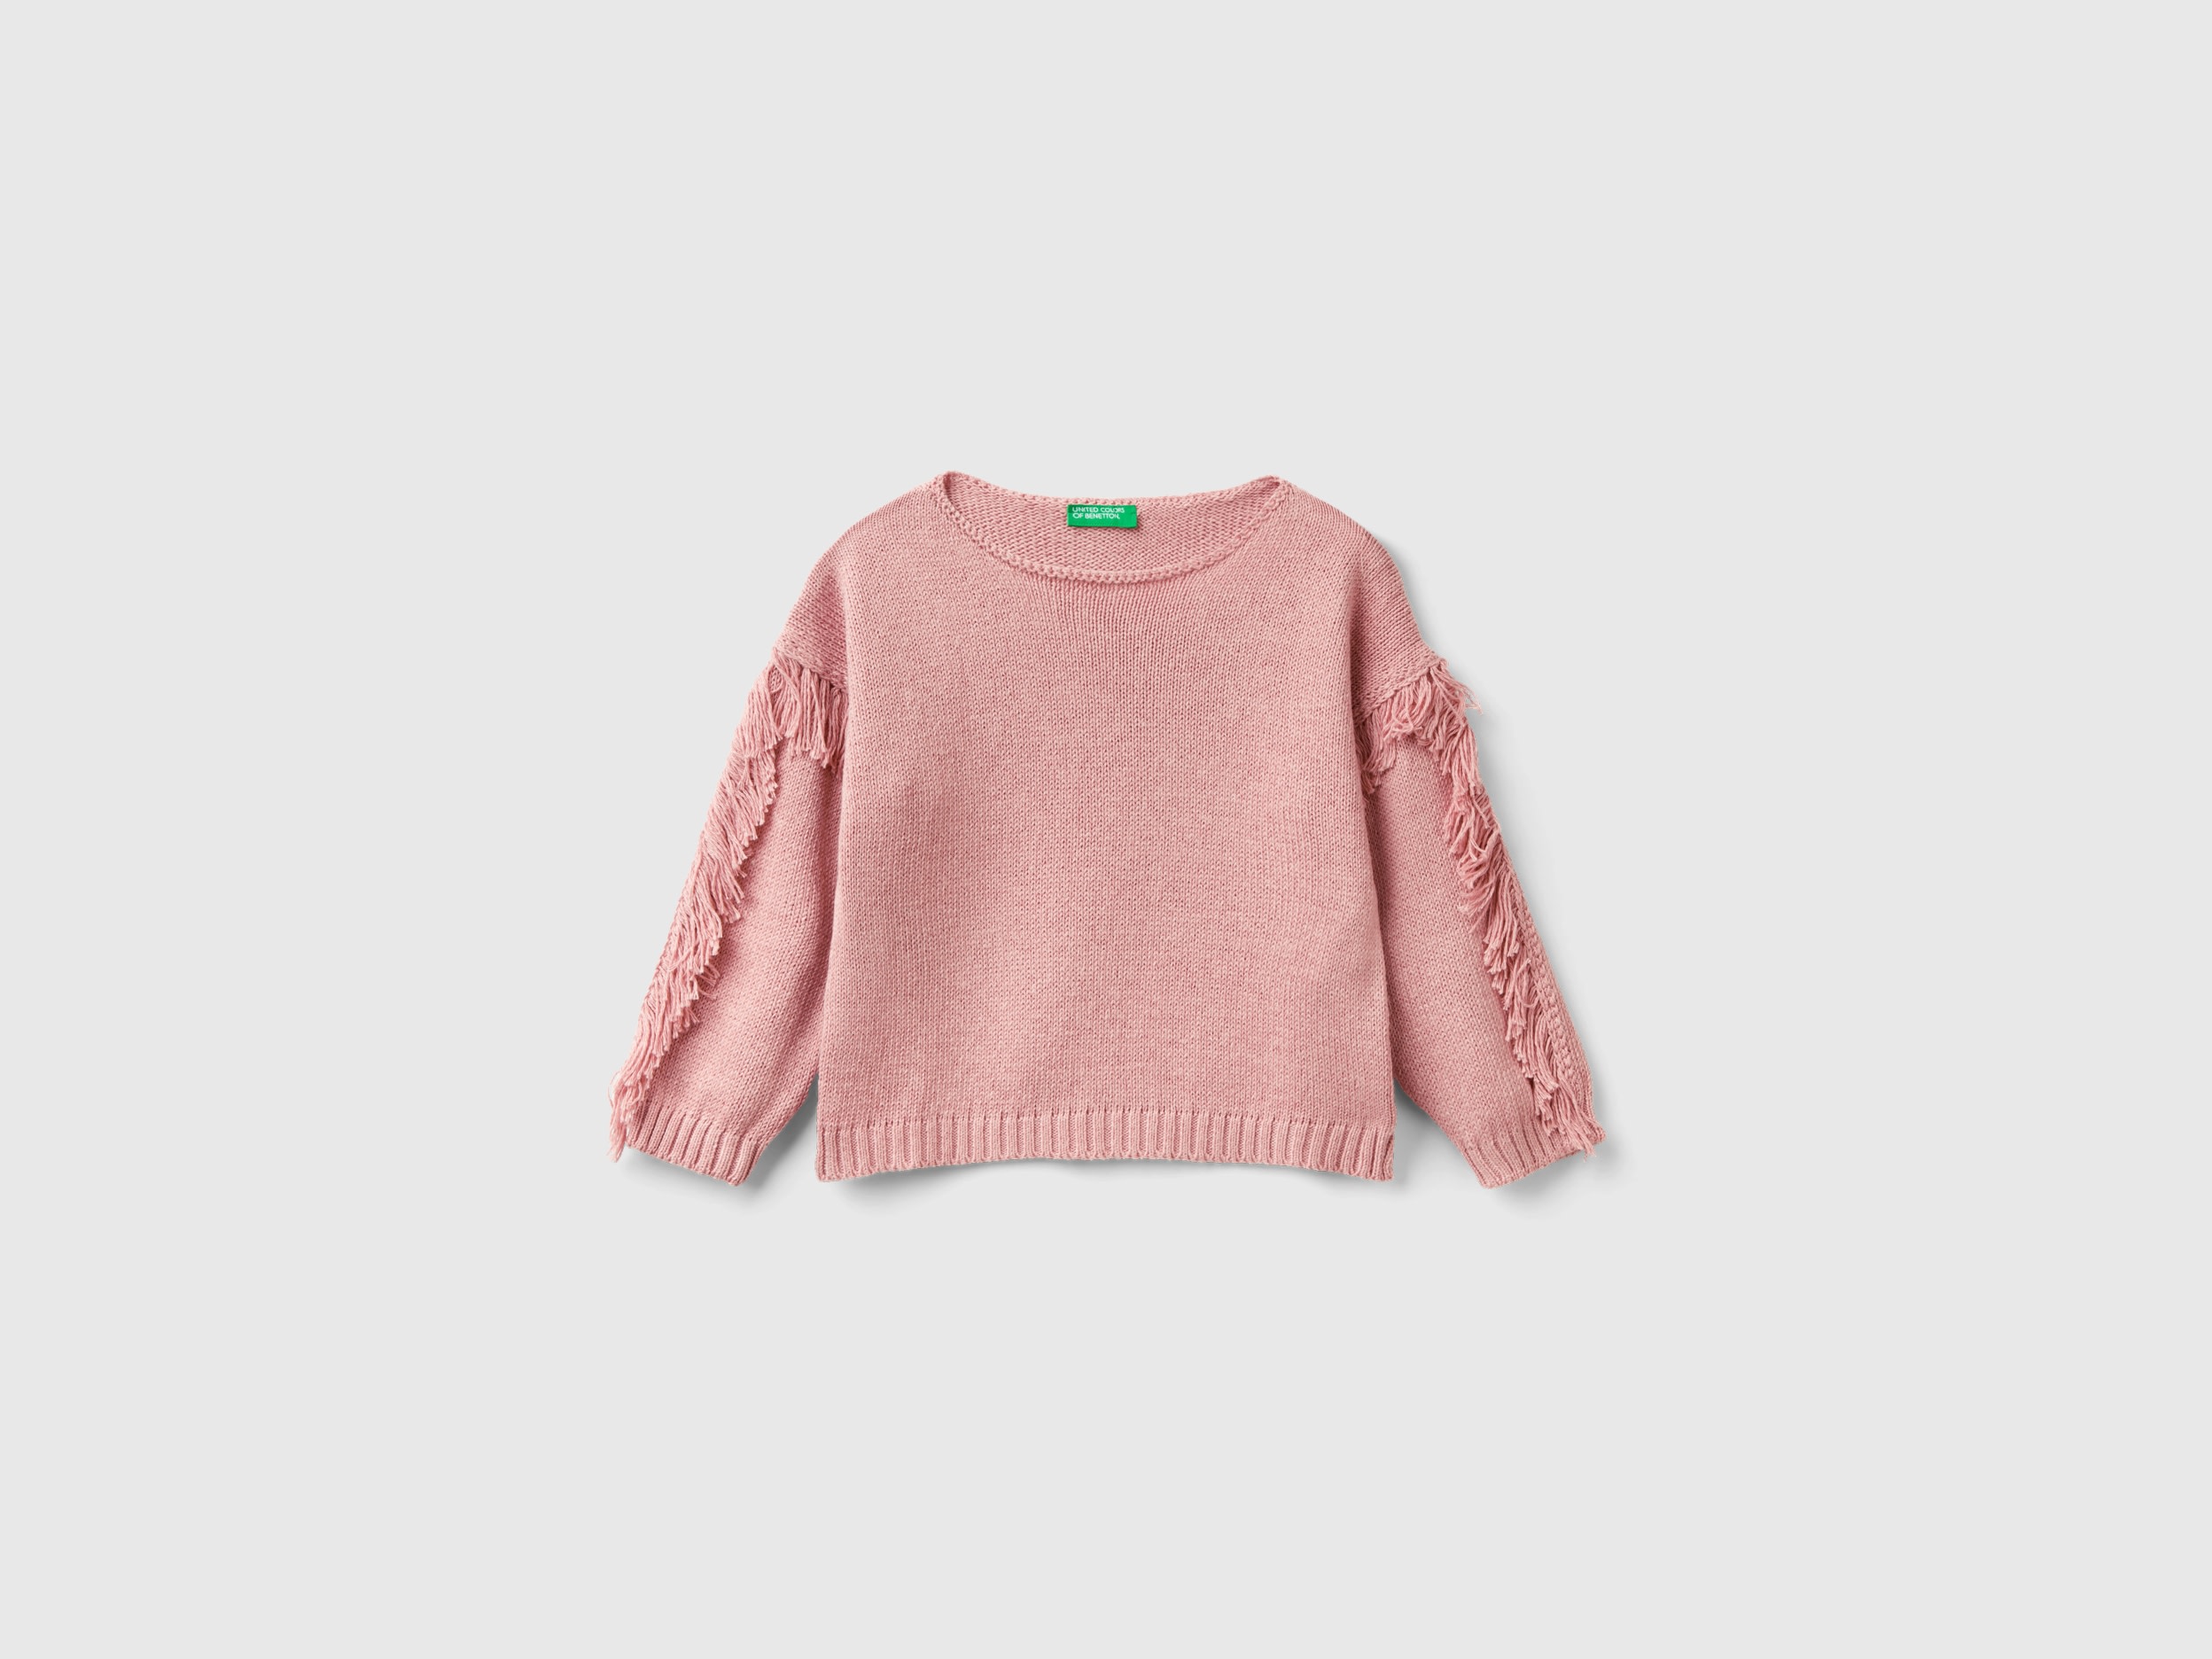 Image of Benetton, Sweater With Fringe, size 116, Pink, Kids